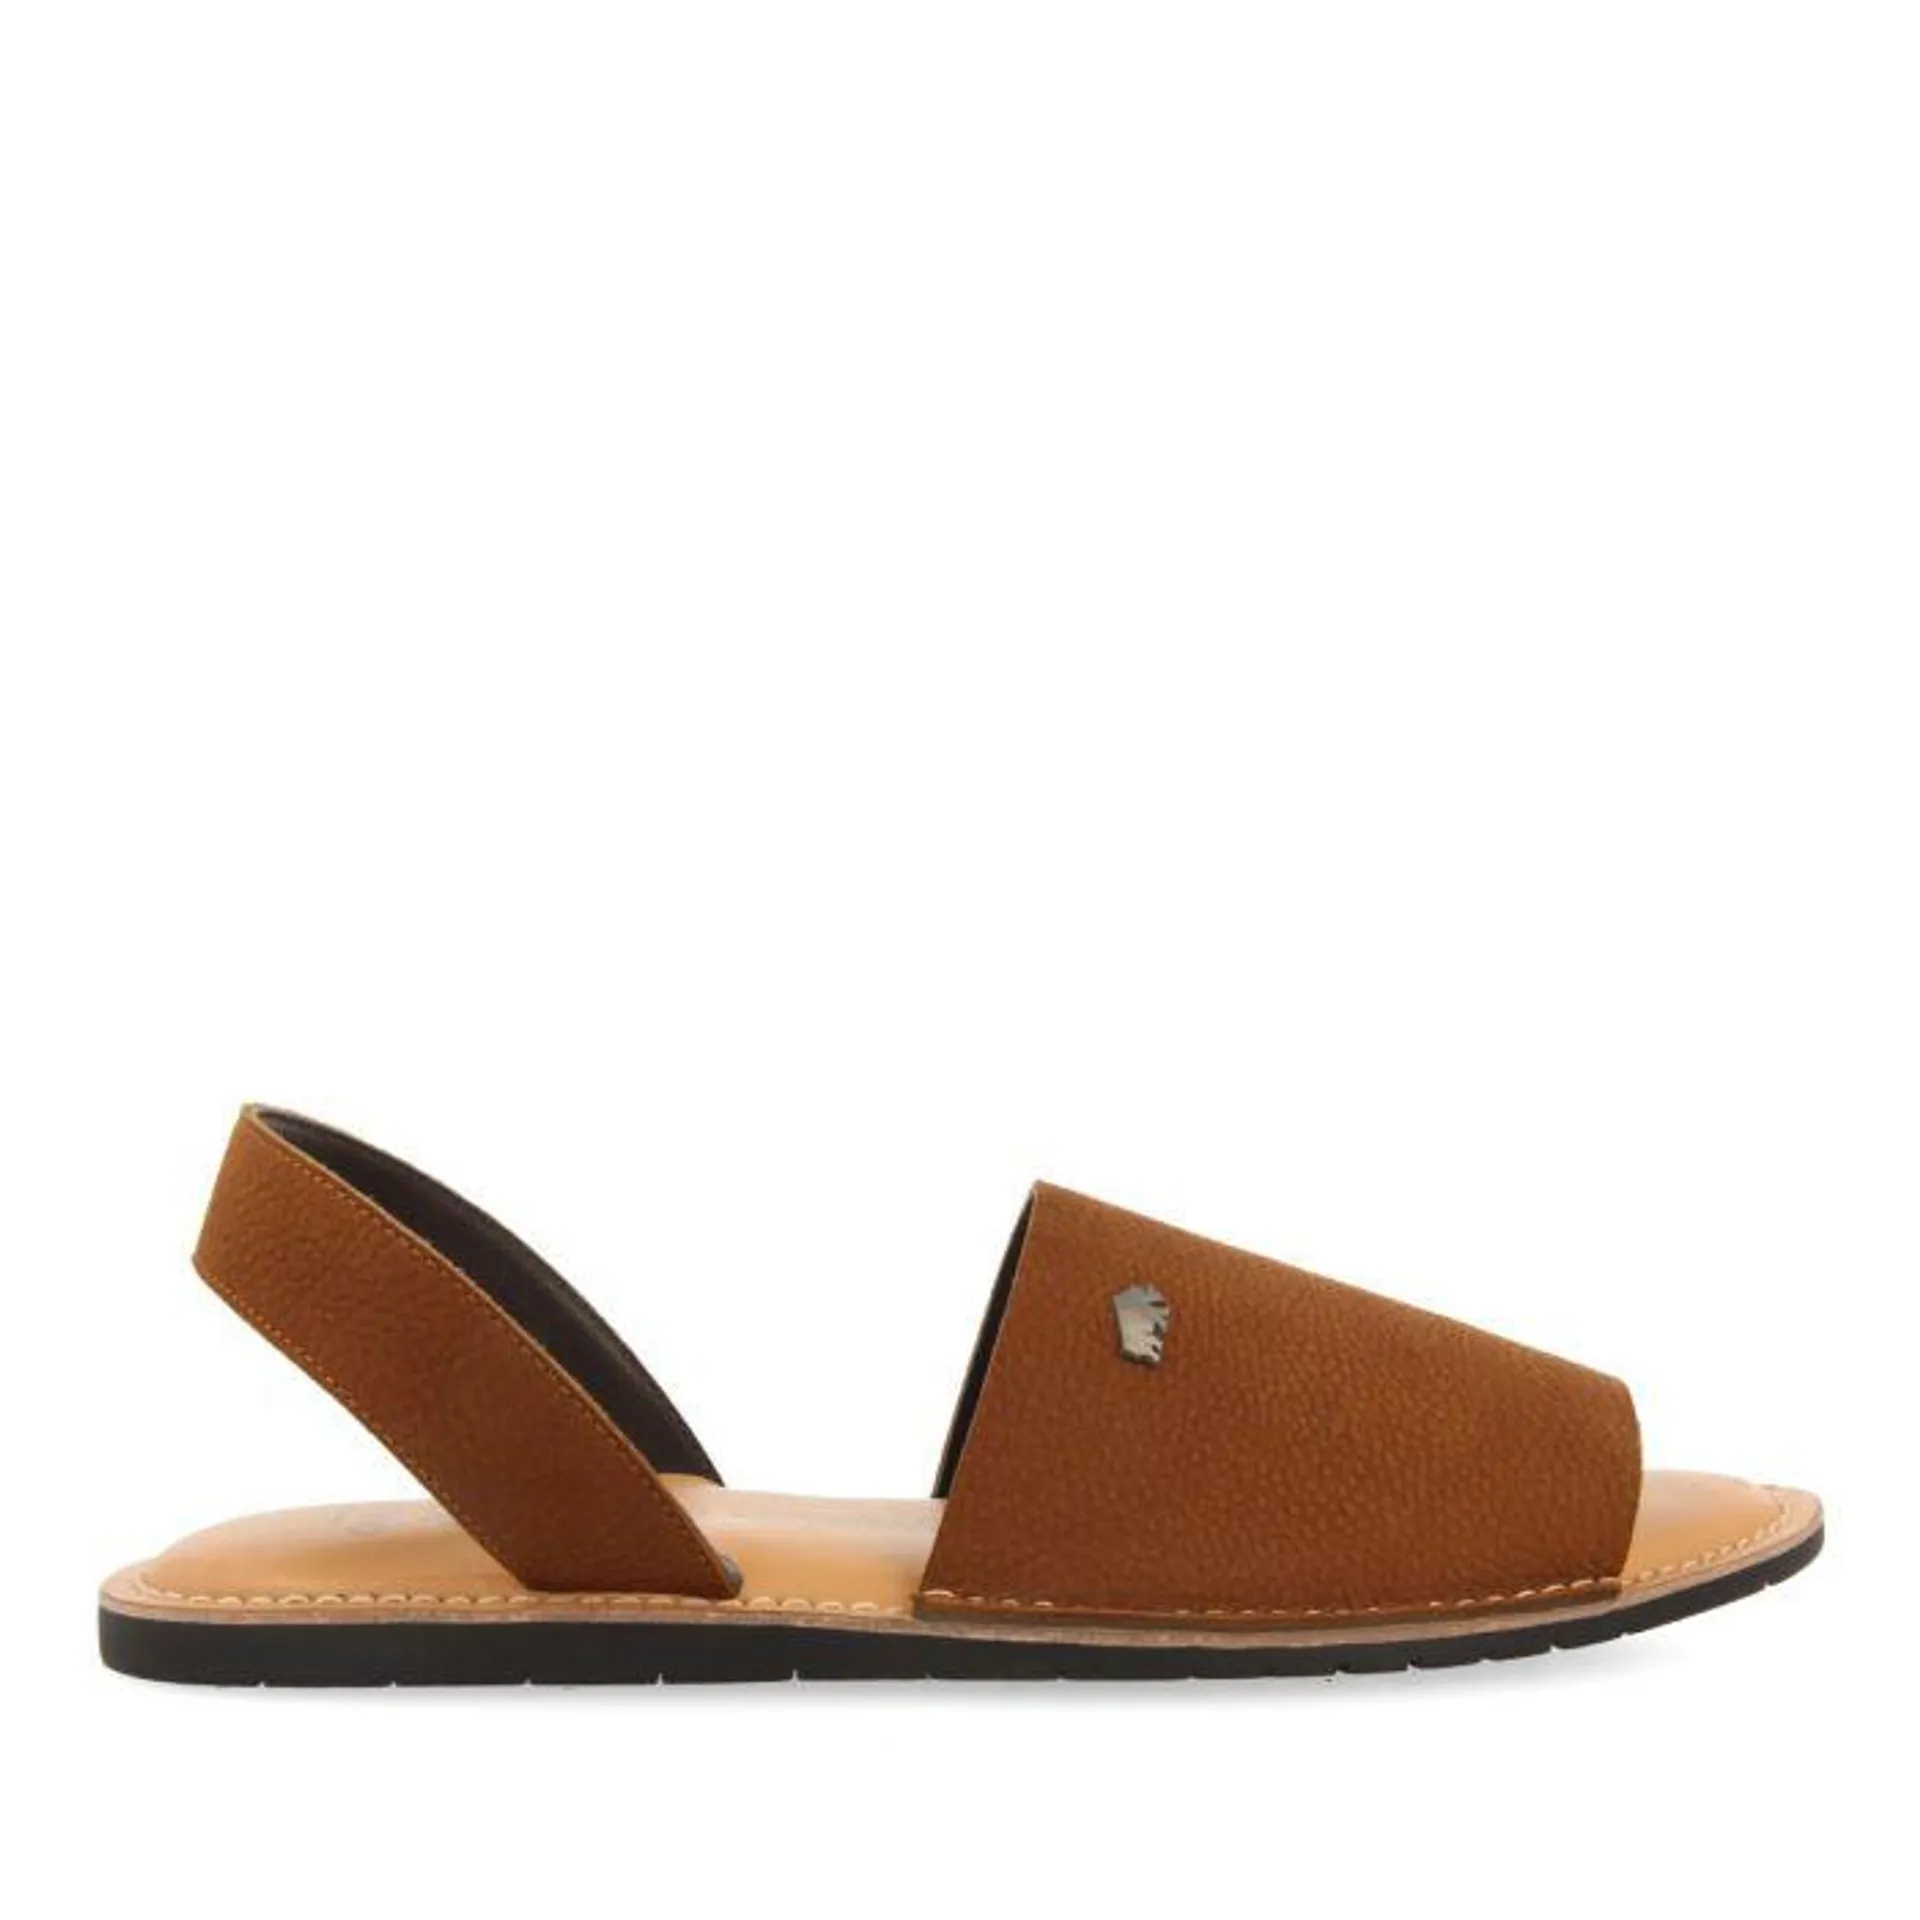 LEATHER COLOR SANDALS MENORQUINAS STYLE FOR MEN PENRYN